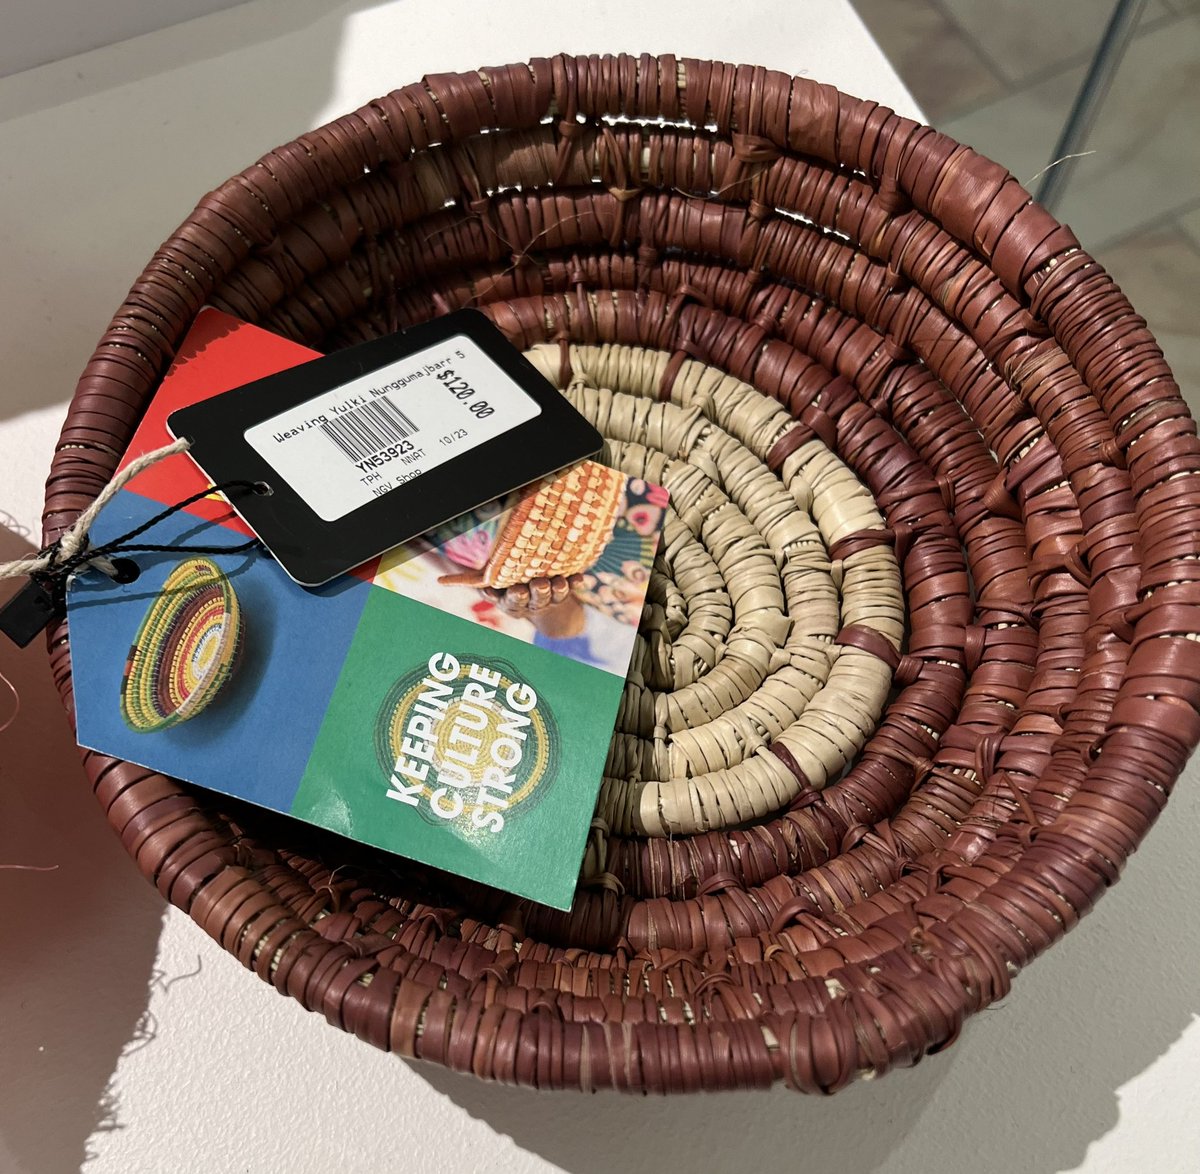 One of these Changairs (Bread Basket) is made in Pakistan and the other is made in Australia. #Handicraft #PakistanHandicraft